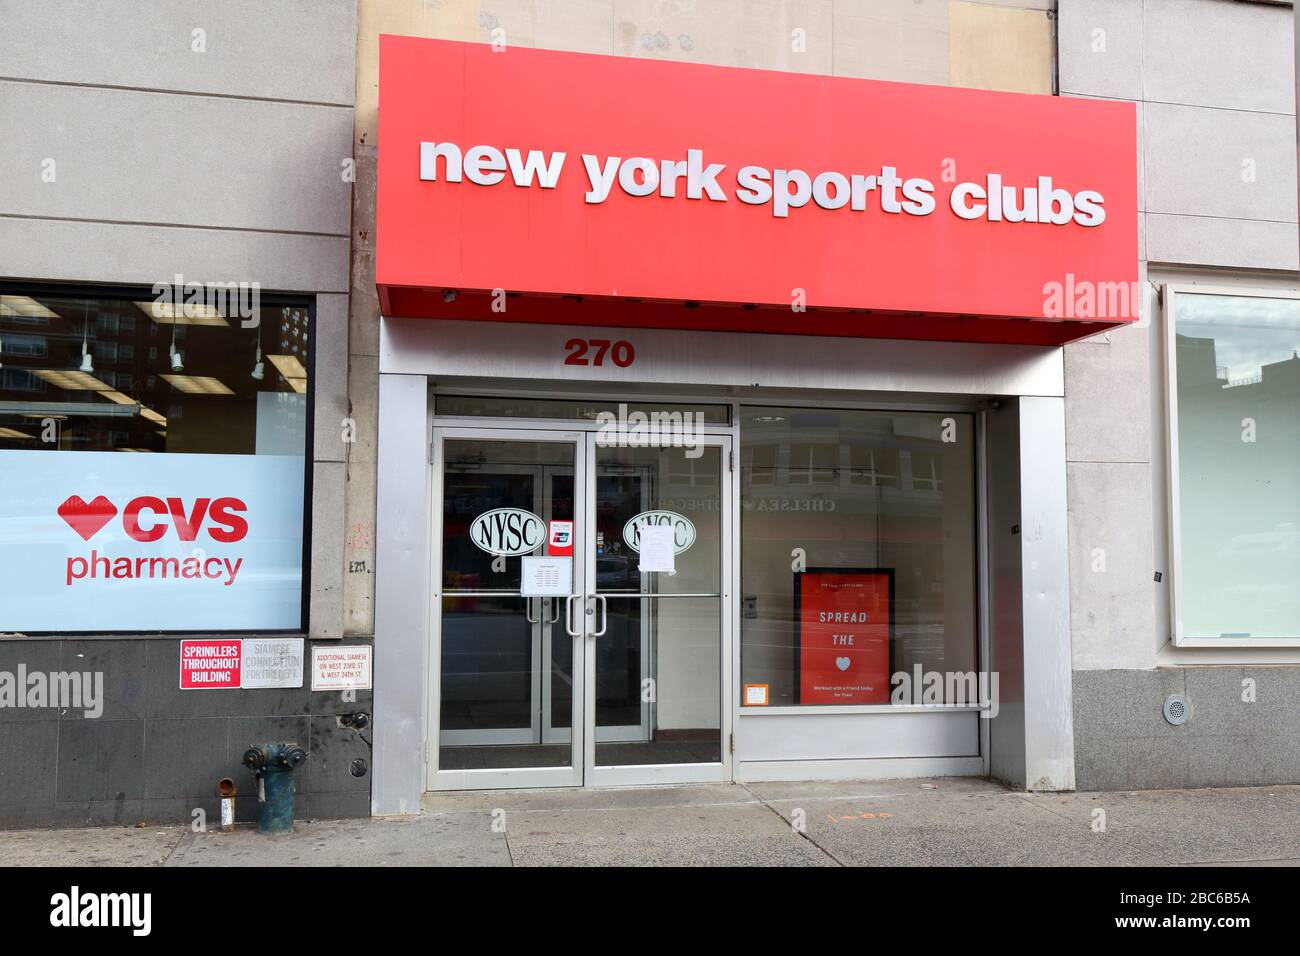 New York Sports Clubs, 270 8th Ave, New York, NYC storefront photo of a gym in the Chelsea neighborhood of Manhattan. Stock Photo